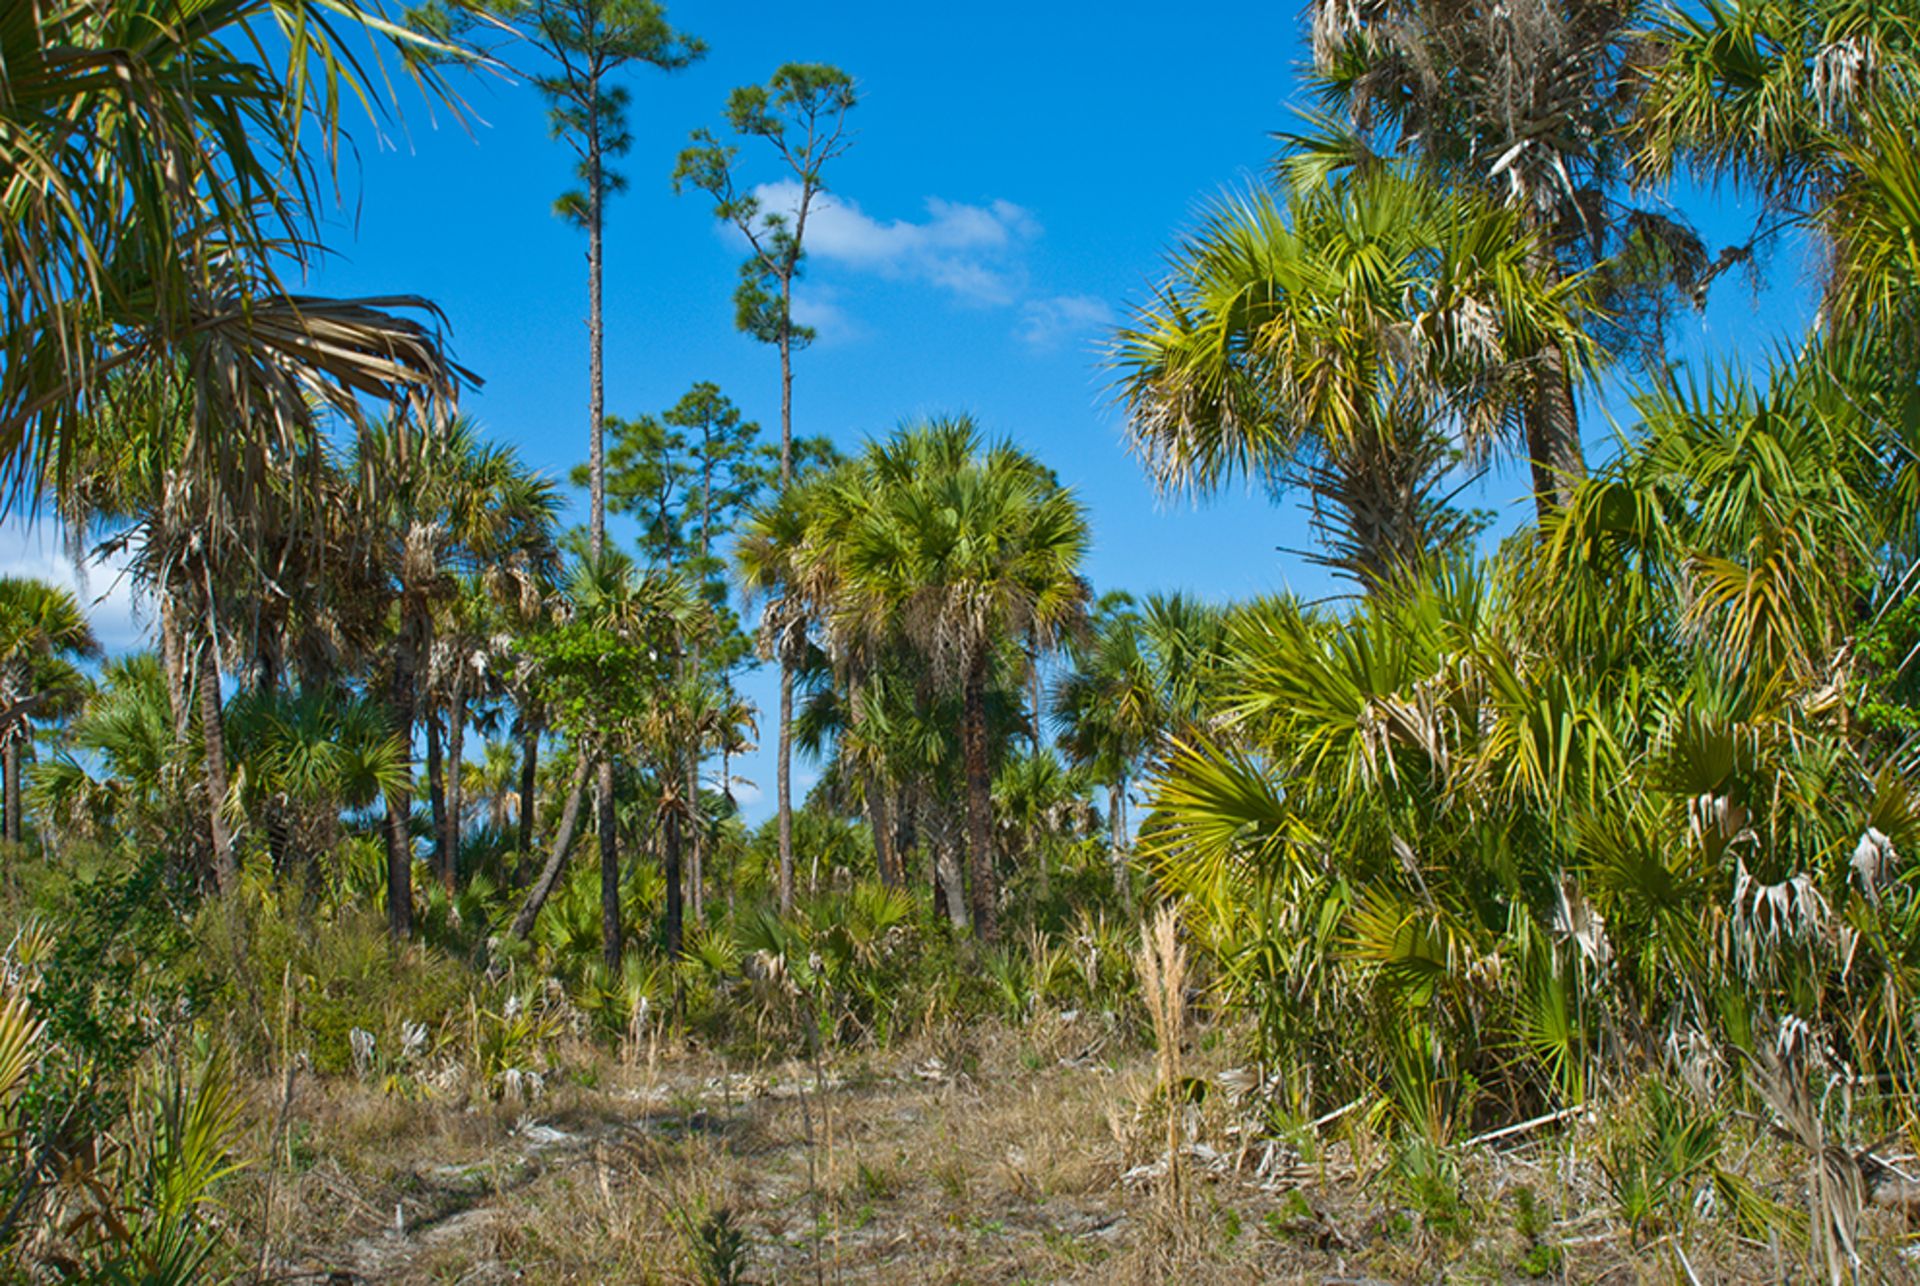 Prime Plot in Charlotte County, Florida: Your Slice of Sunshine! - Image 7 of 10